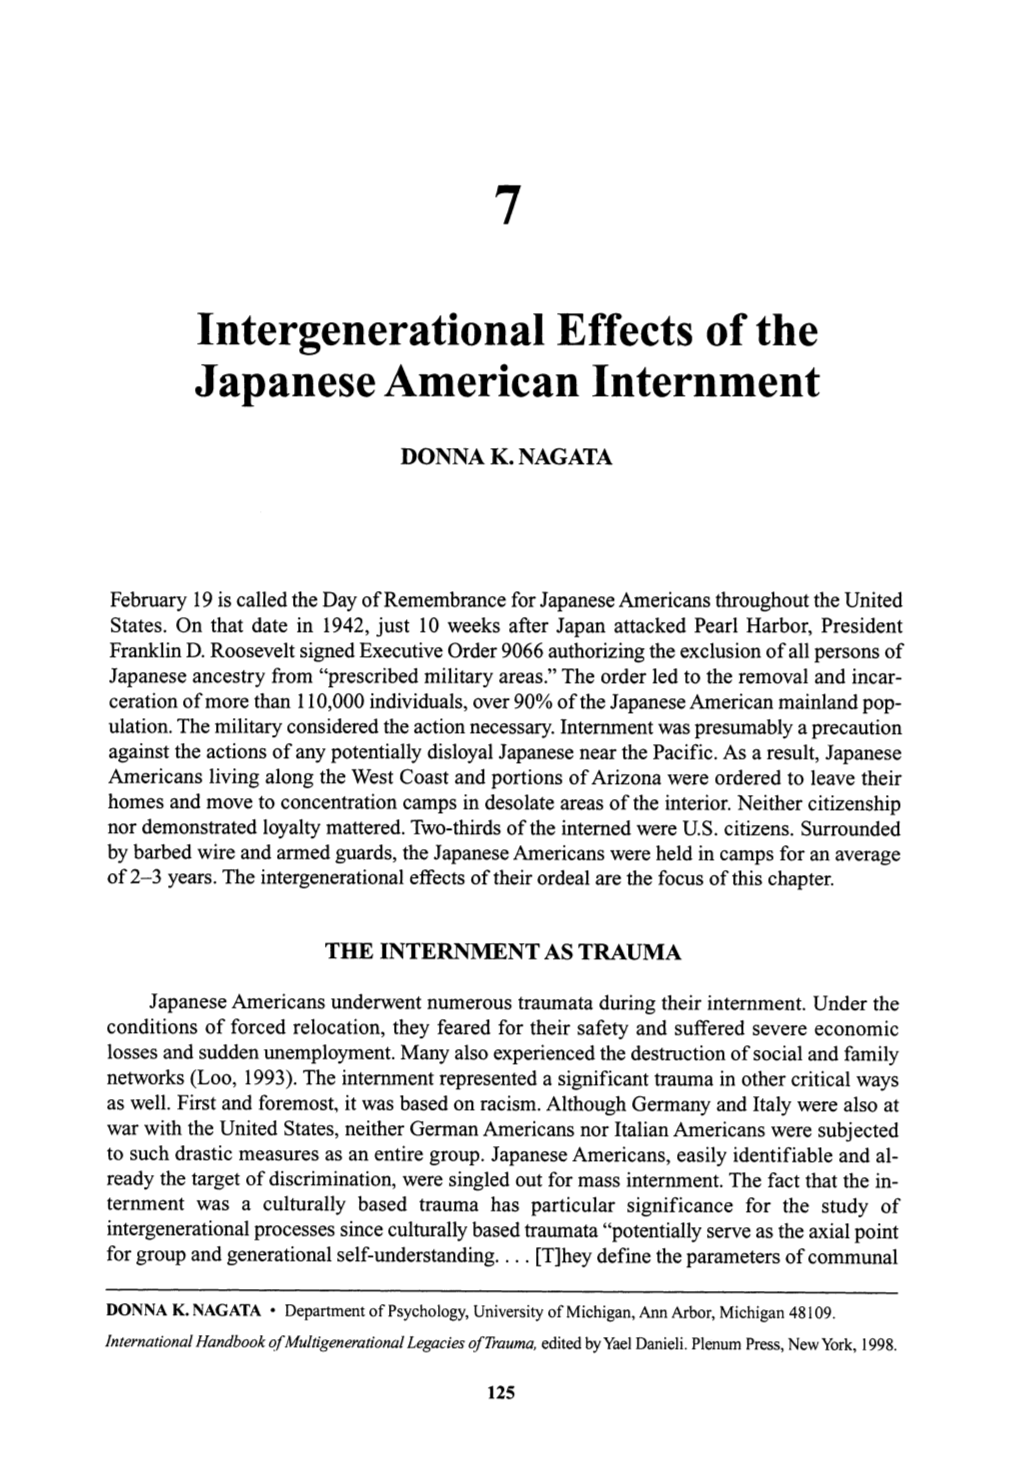 Intergenerational Effects of the Japanese American Internment